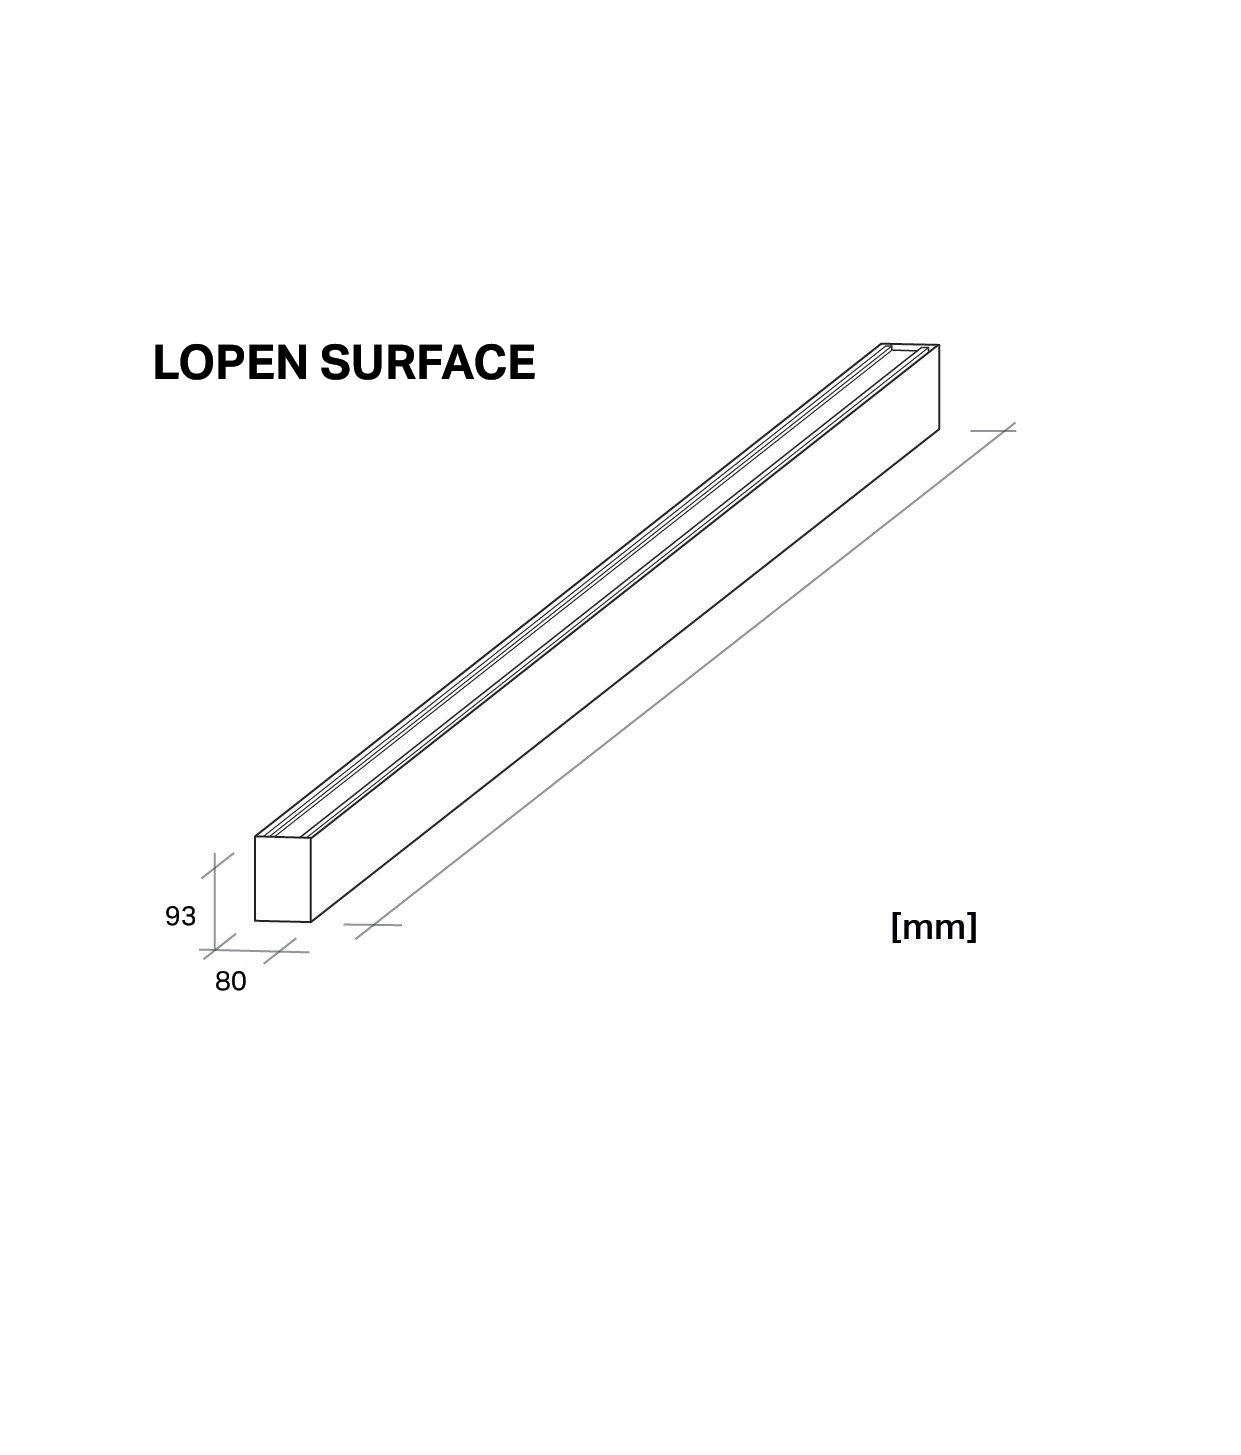 LOPEN-surface-technical-drawing-2021.png